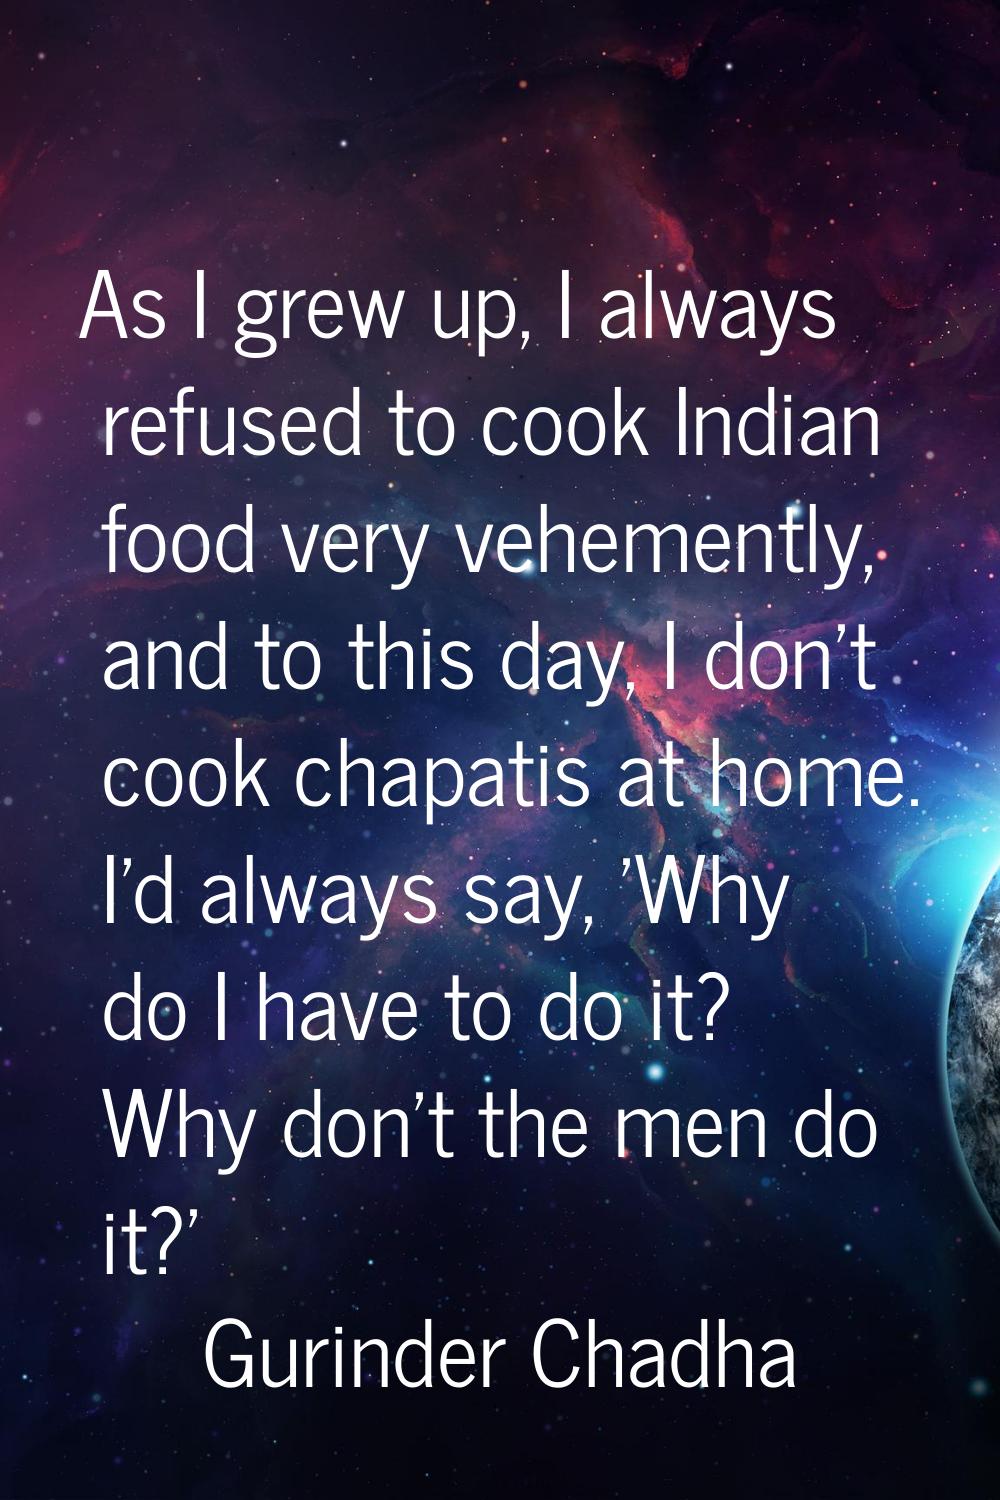 As I grew up, I always refused to cook Indian food very vehemently, and to this day, I don't cook c